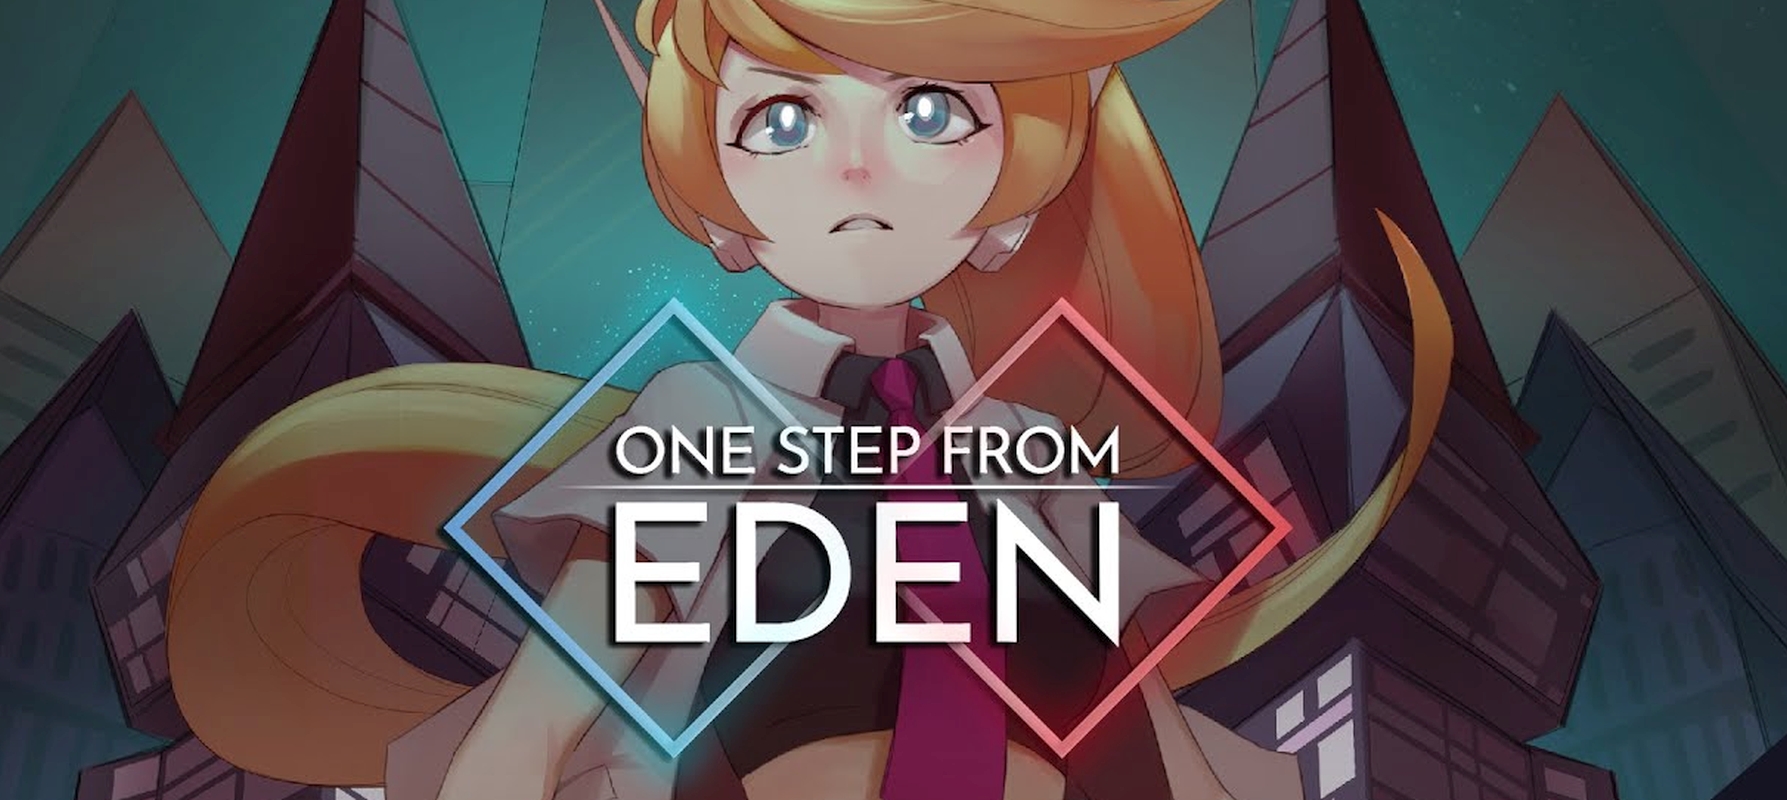 One Step From Eden Launches Late March On PC And Nintendo Switch